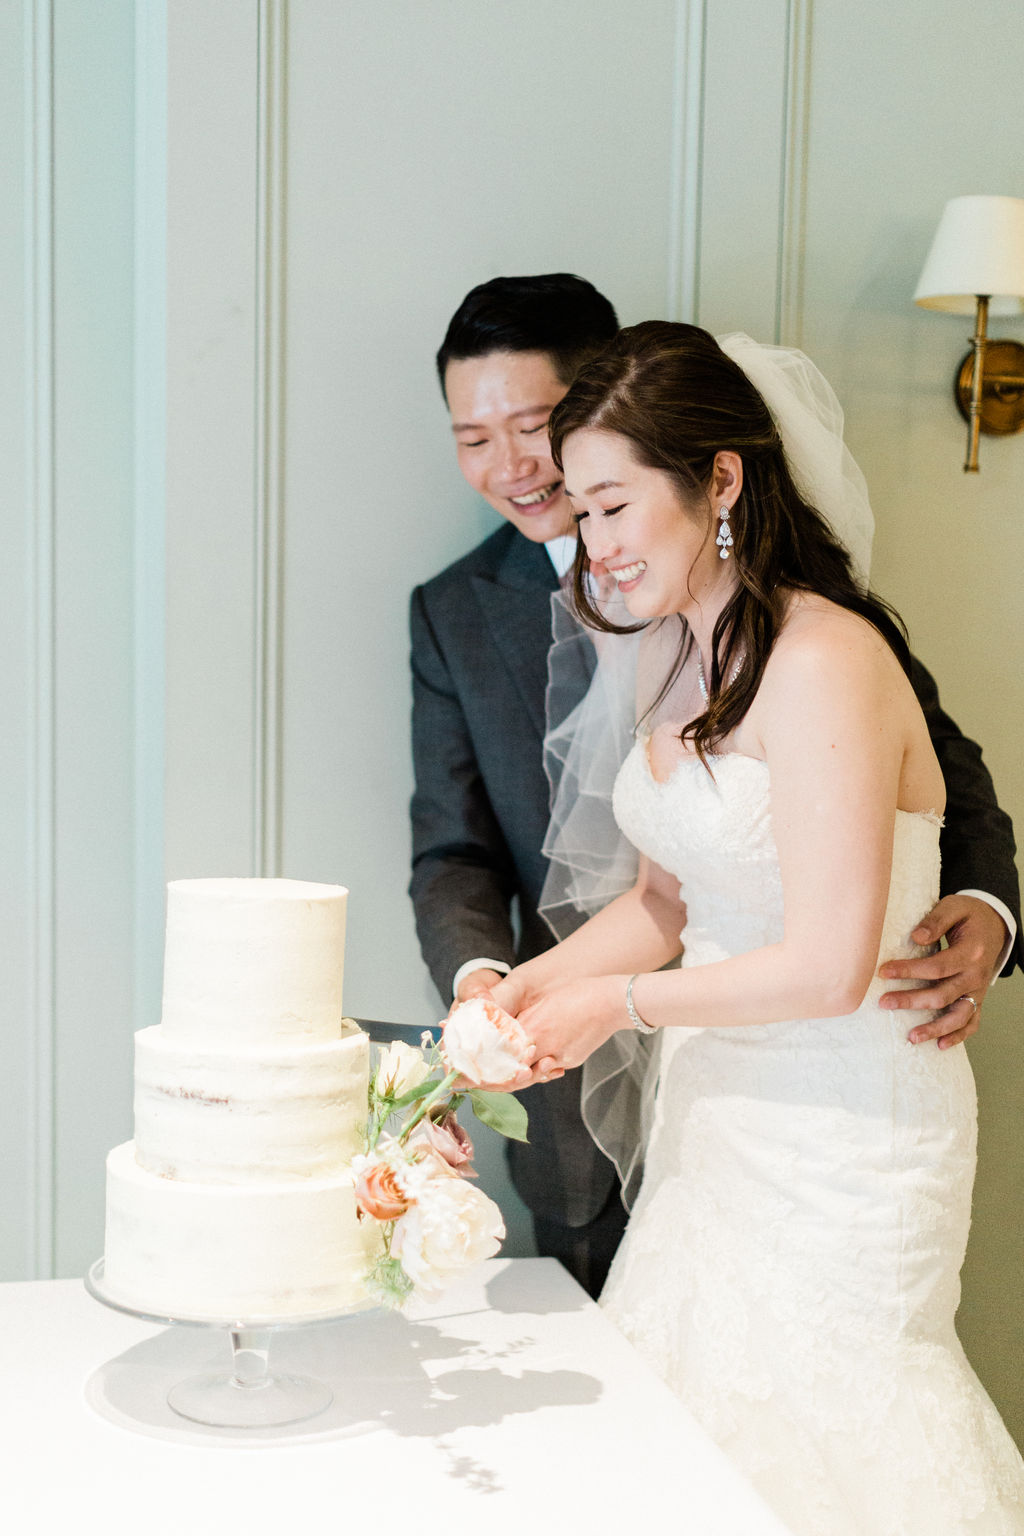 Cake cutting moment at Bingham Riverhouse wedding. Photo by Jacob and Pauline